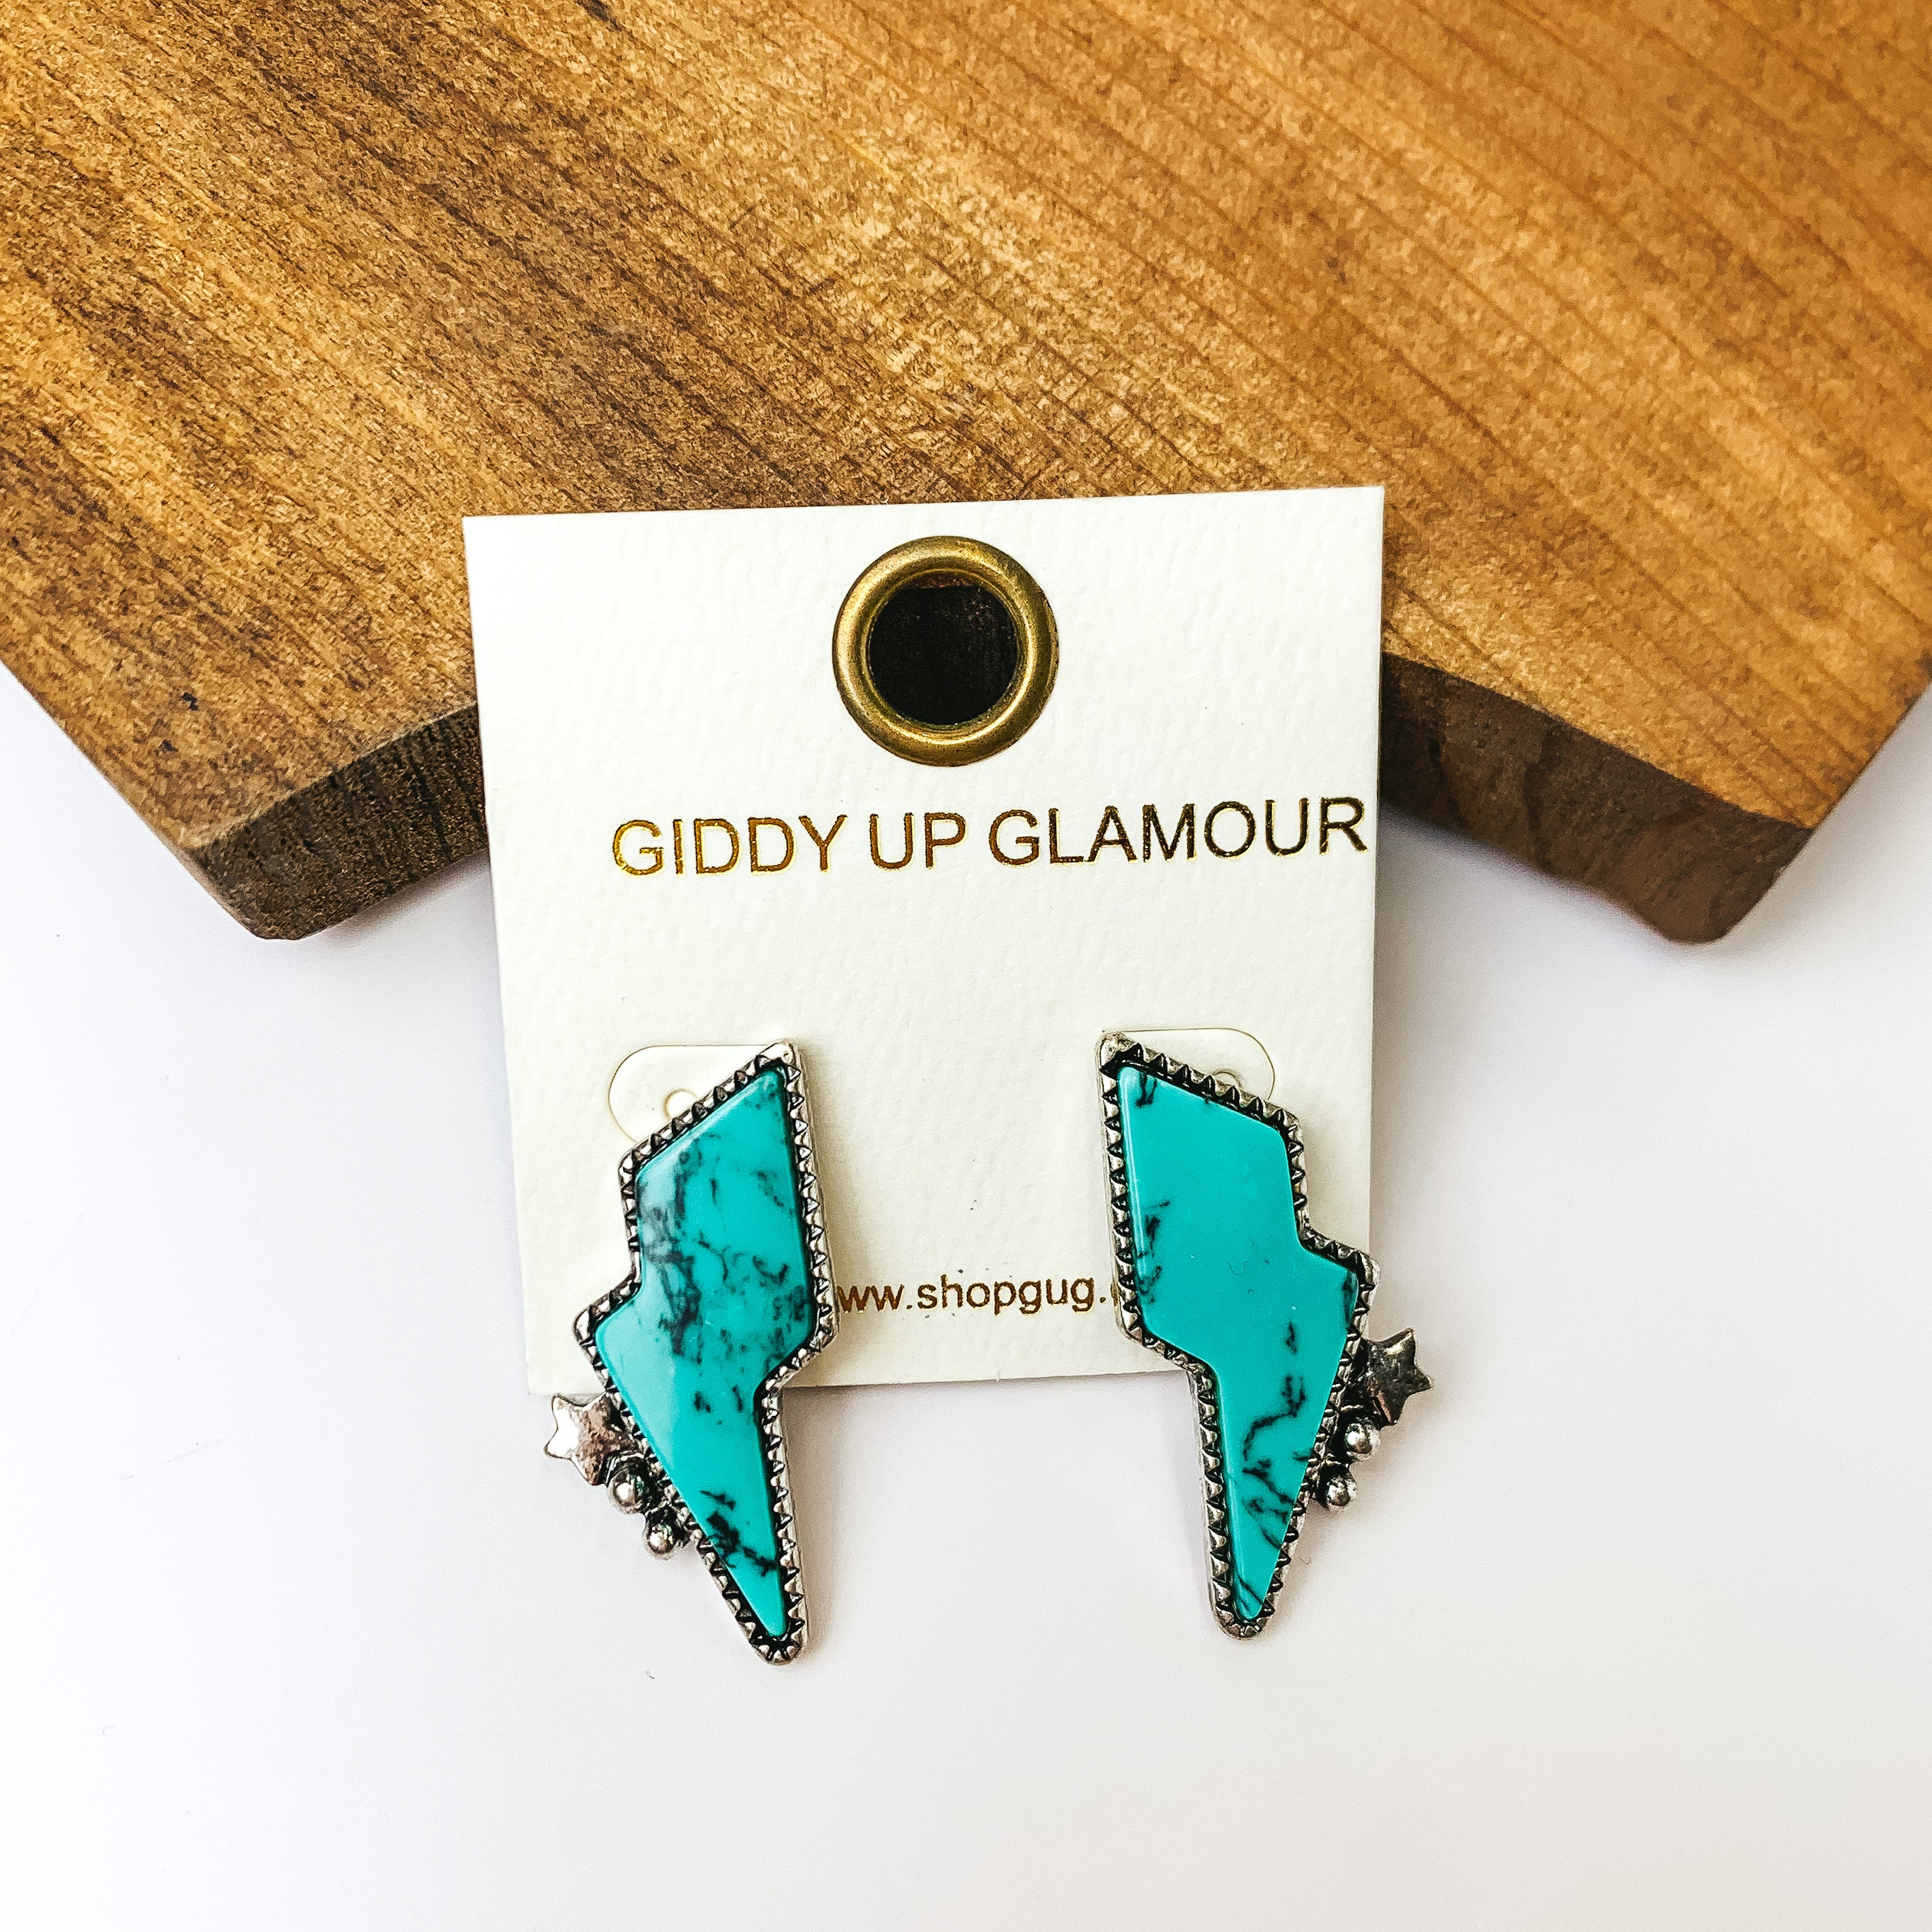 Driving Down Lightning Bolt Stone Post Earrings in Turquoise with Silver Detailing. Pictured on a white background with a wood piece behind it.